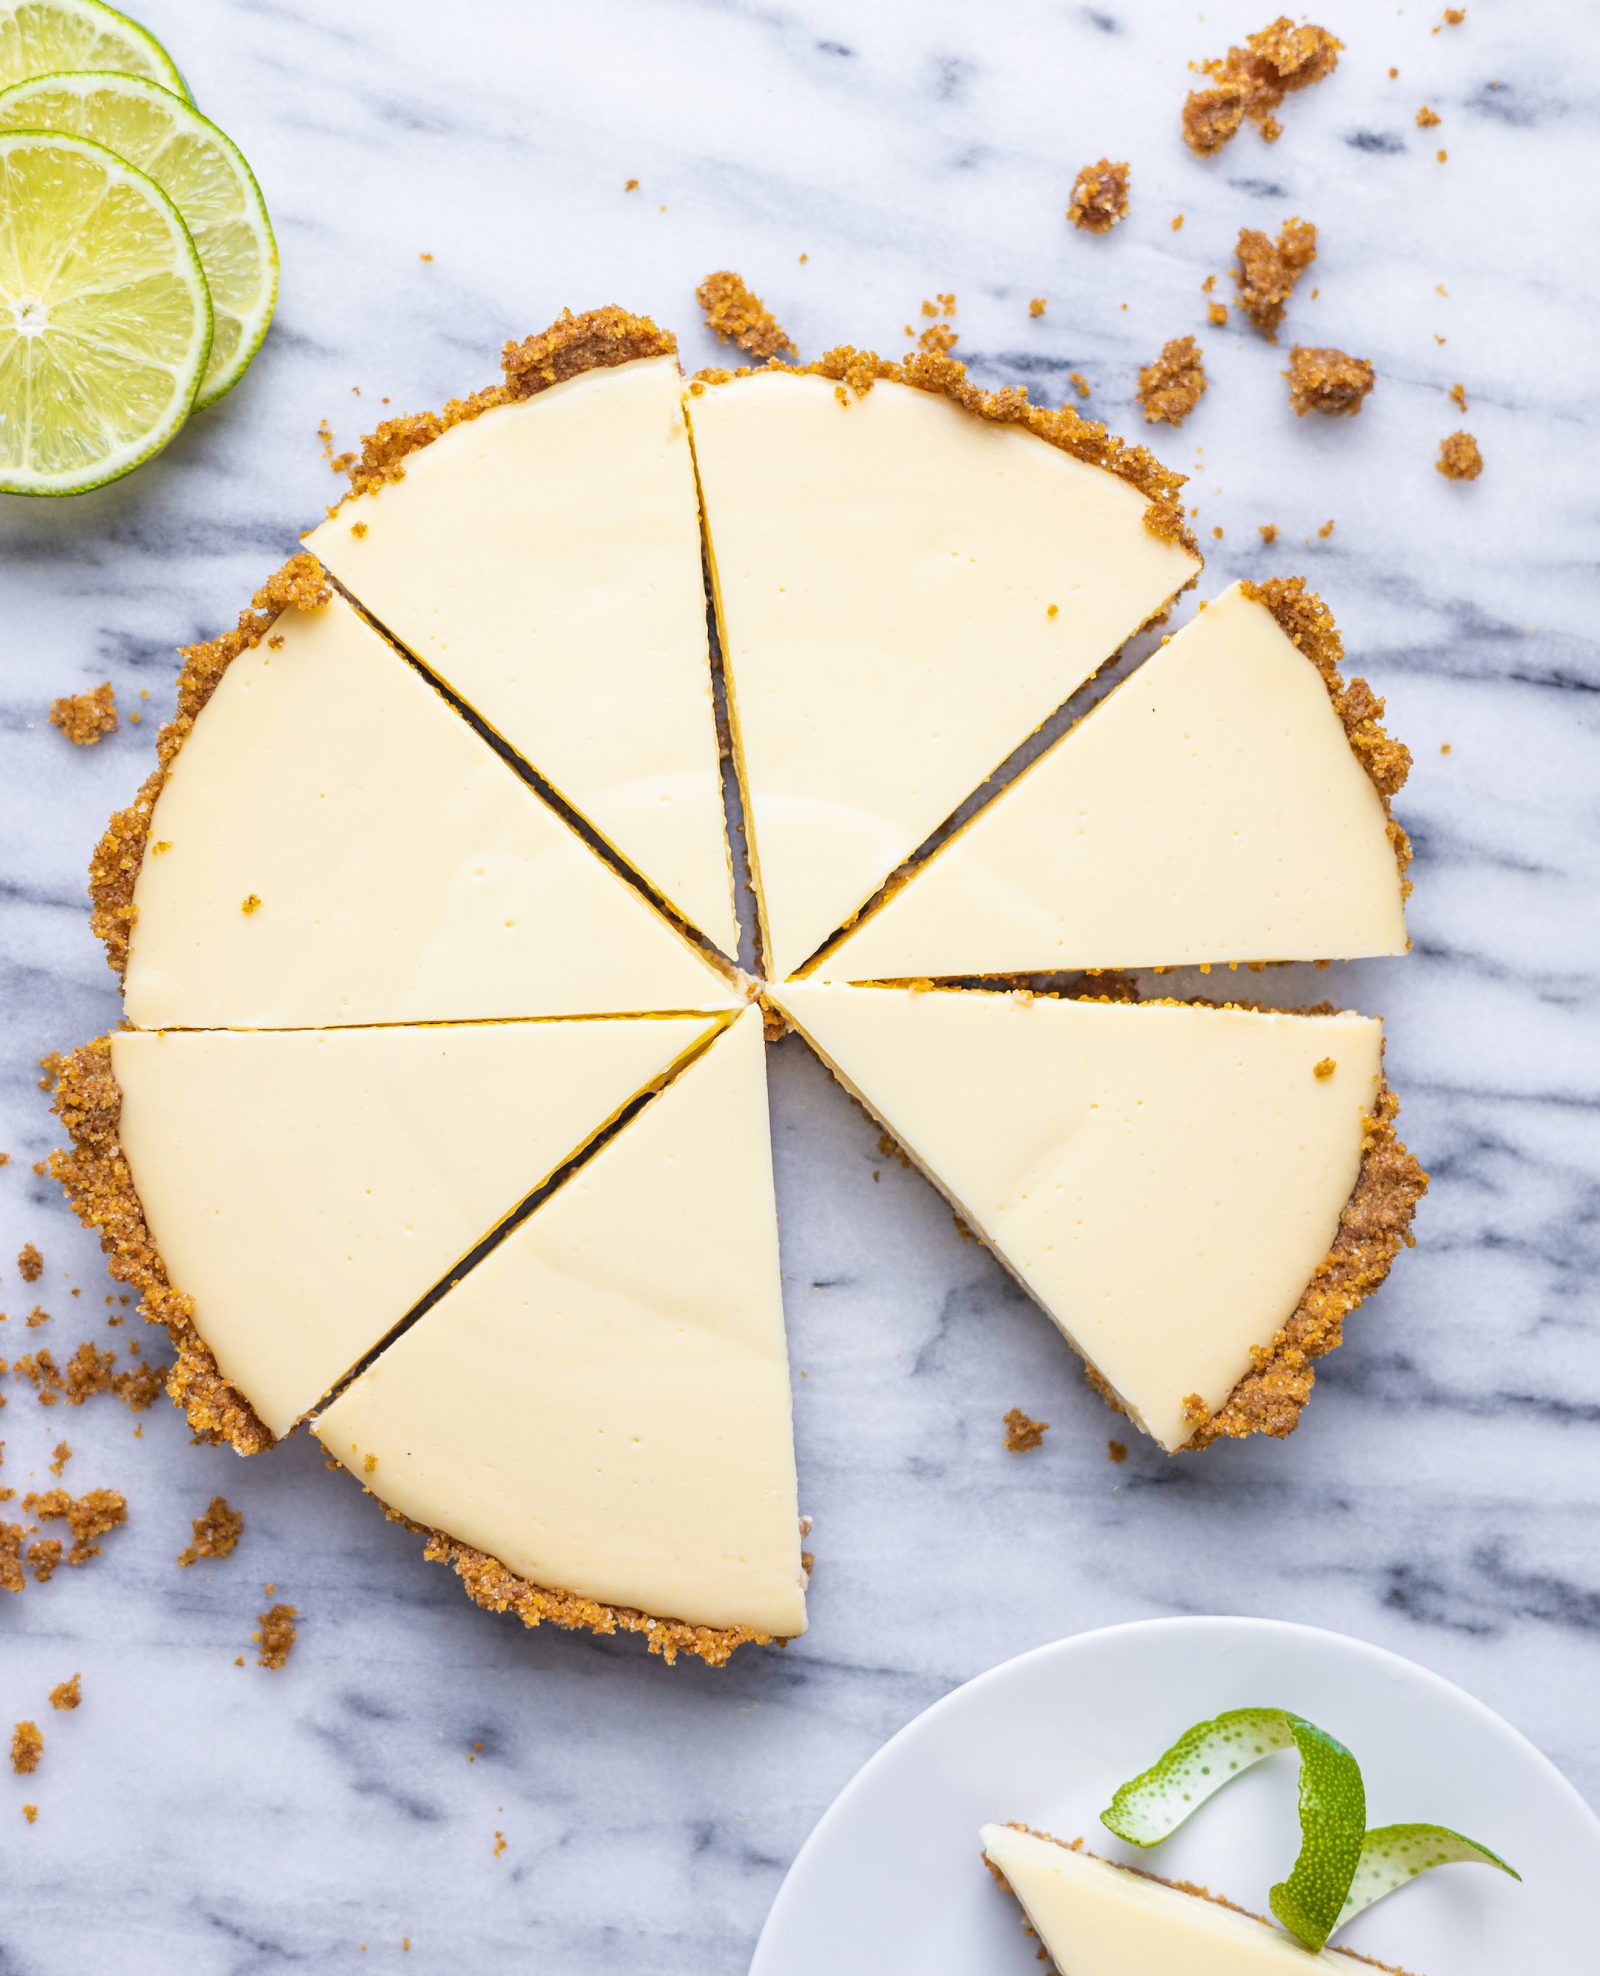 an overhead view of a Key Lime Pie on a marble surface, cut into 8 slices, with one slice on a white plate, mostly out of view